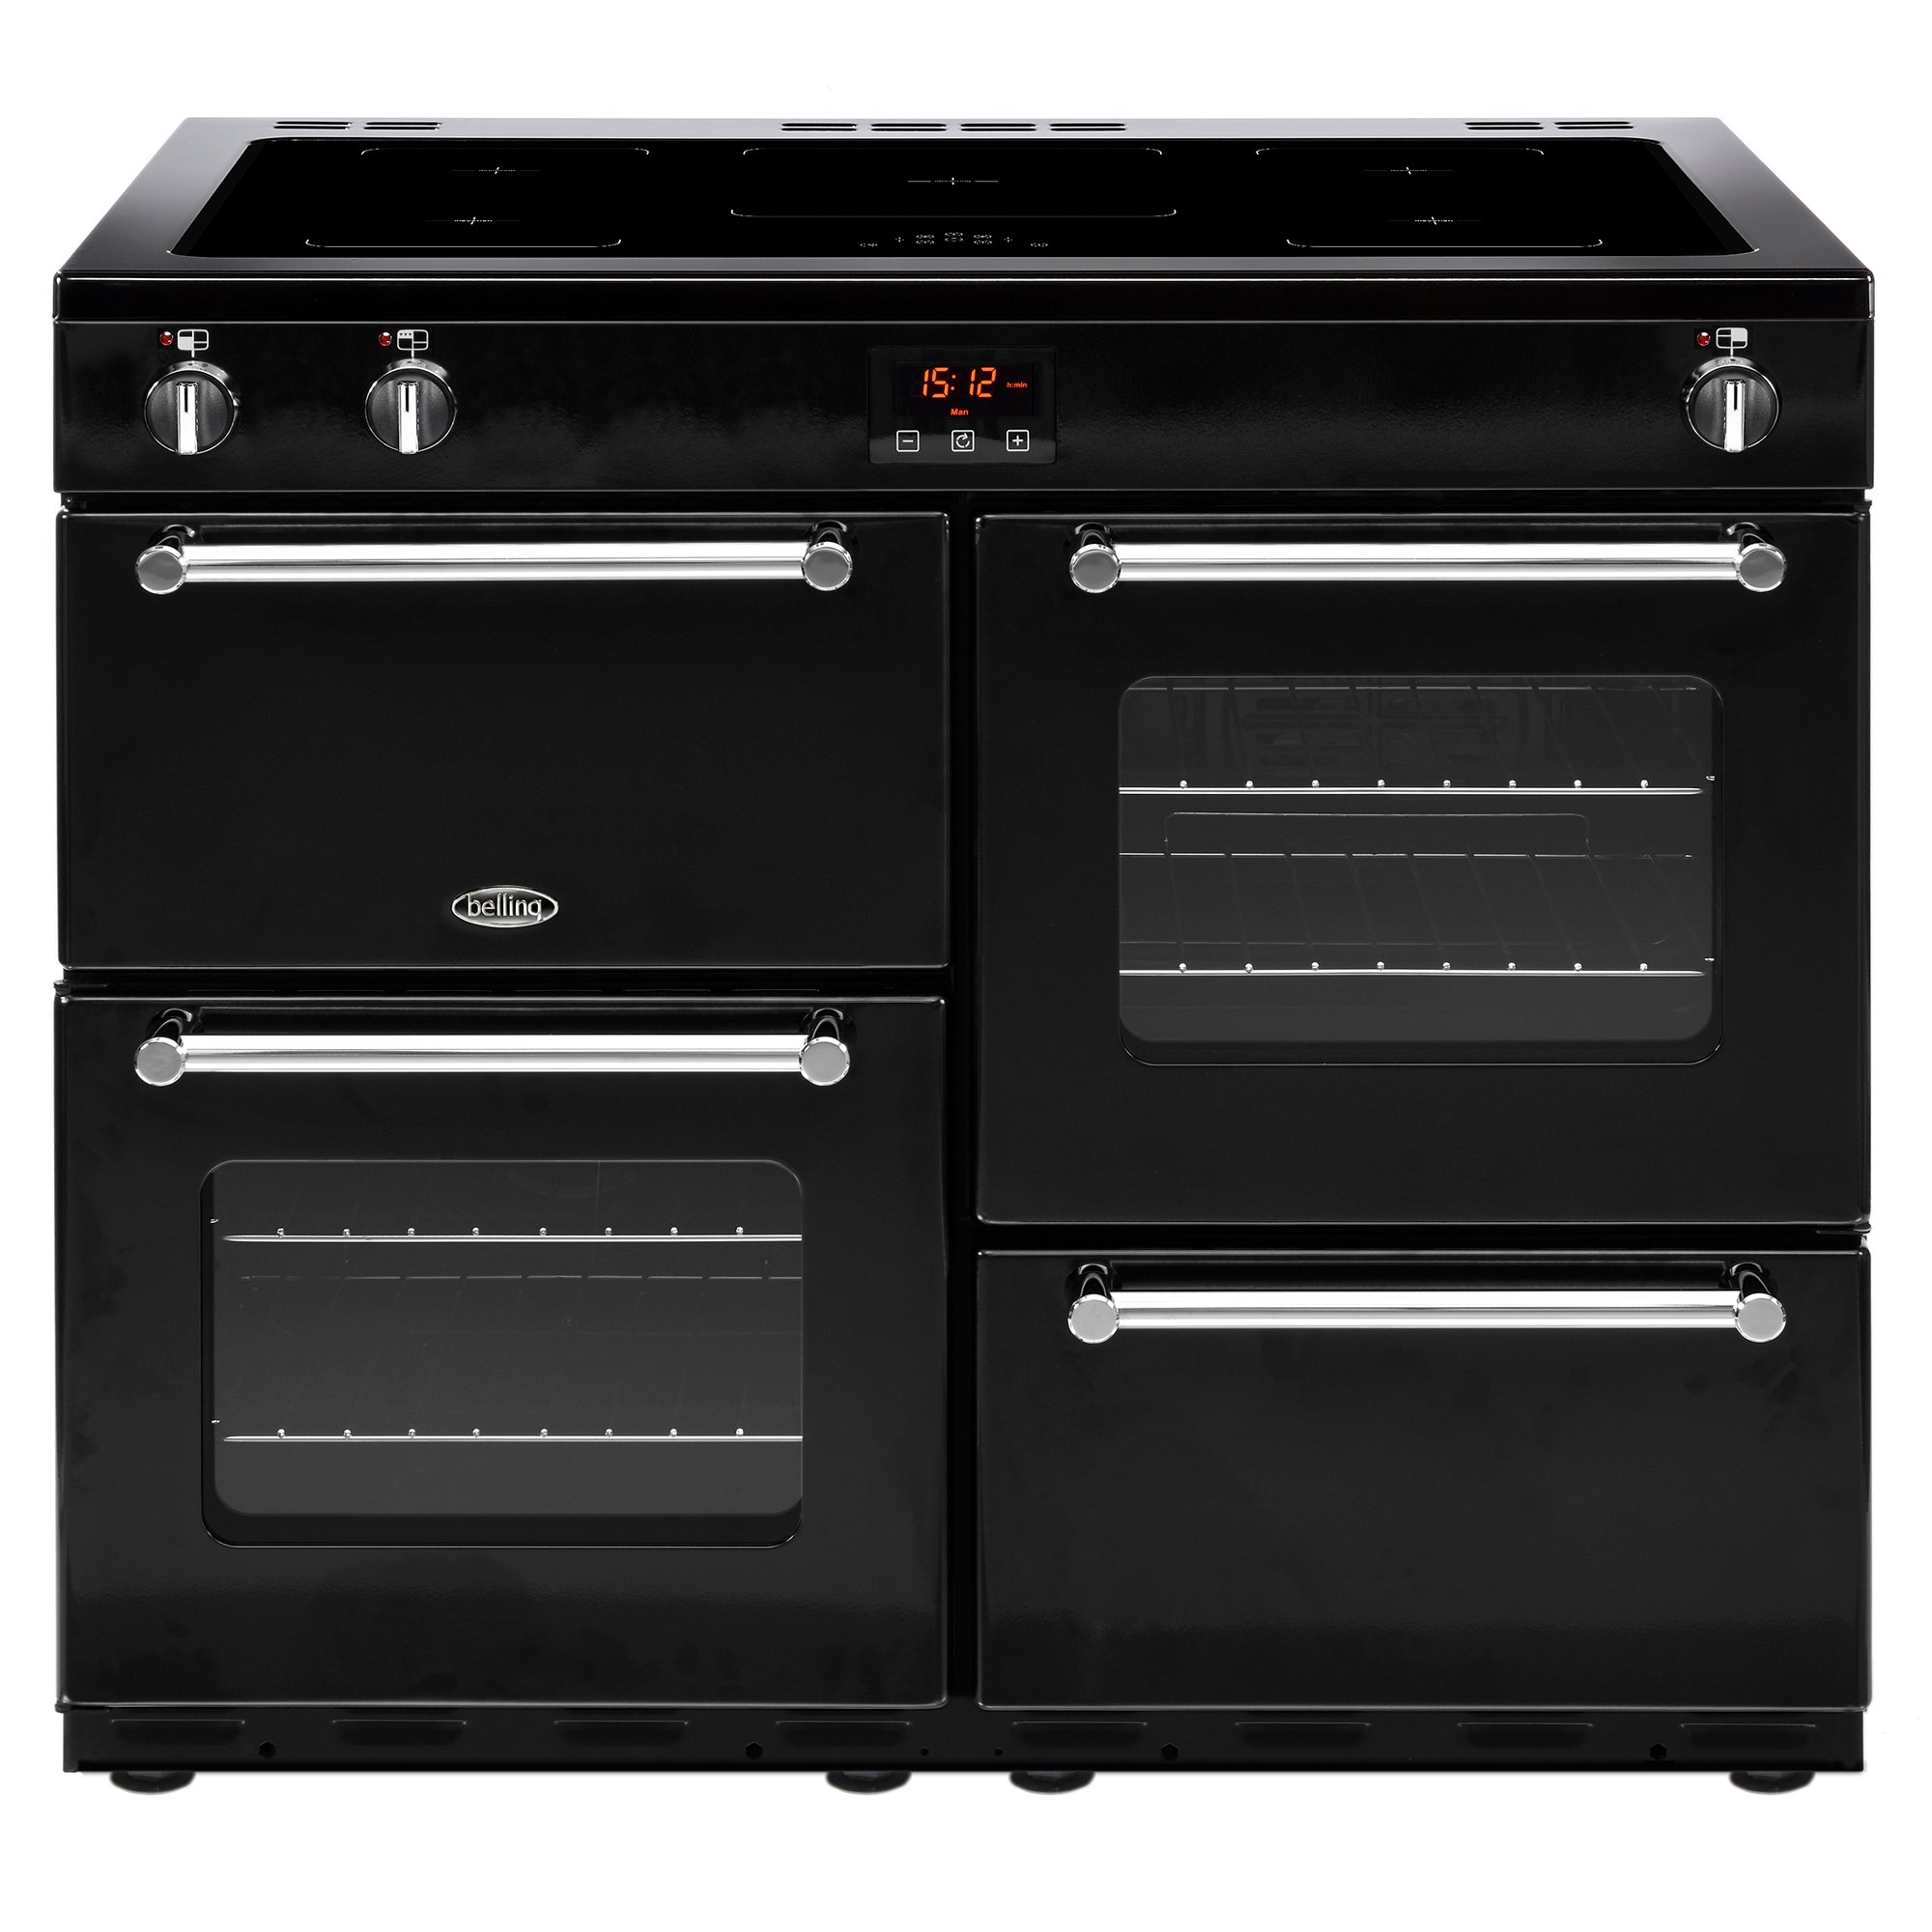 100cm induction range cooker with a 5 zone induction hob, variable rate electric grill, 2 conventional ovens and a main fanned oven.Requires 32A connection.